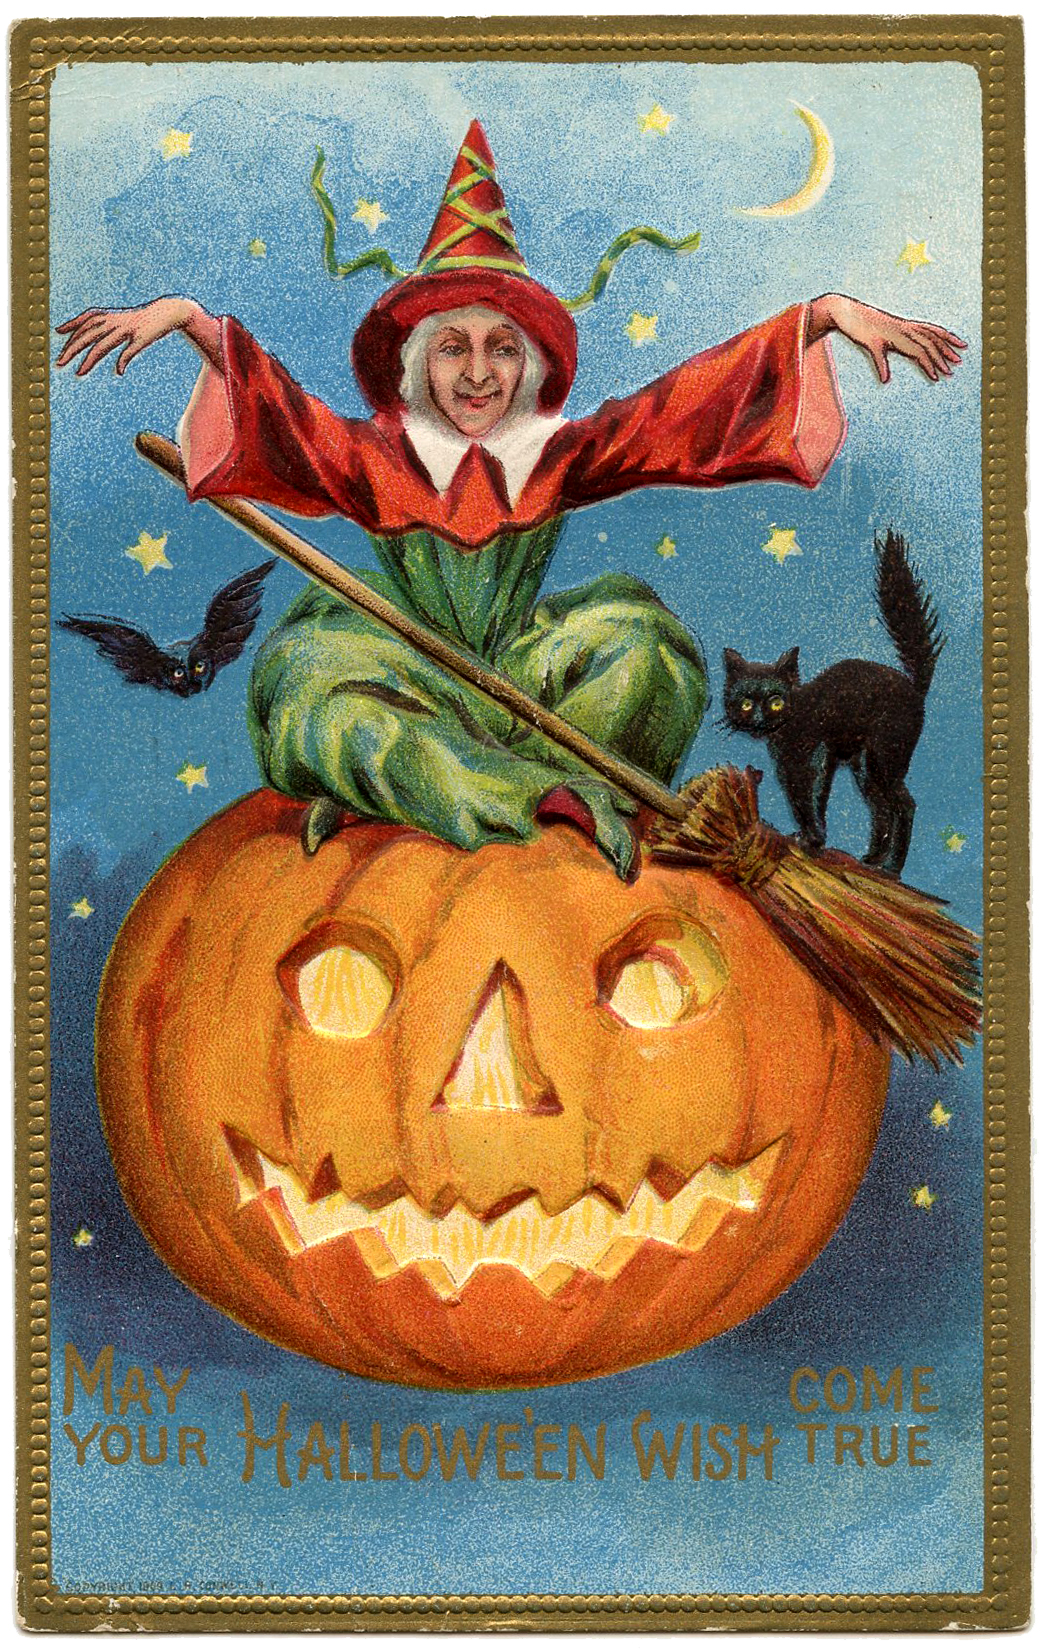 Halloween Witch With Pumpkin Vintage Image Greeting Cards 10 pc Set HA05 